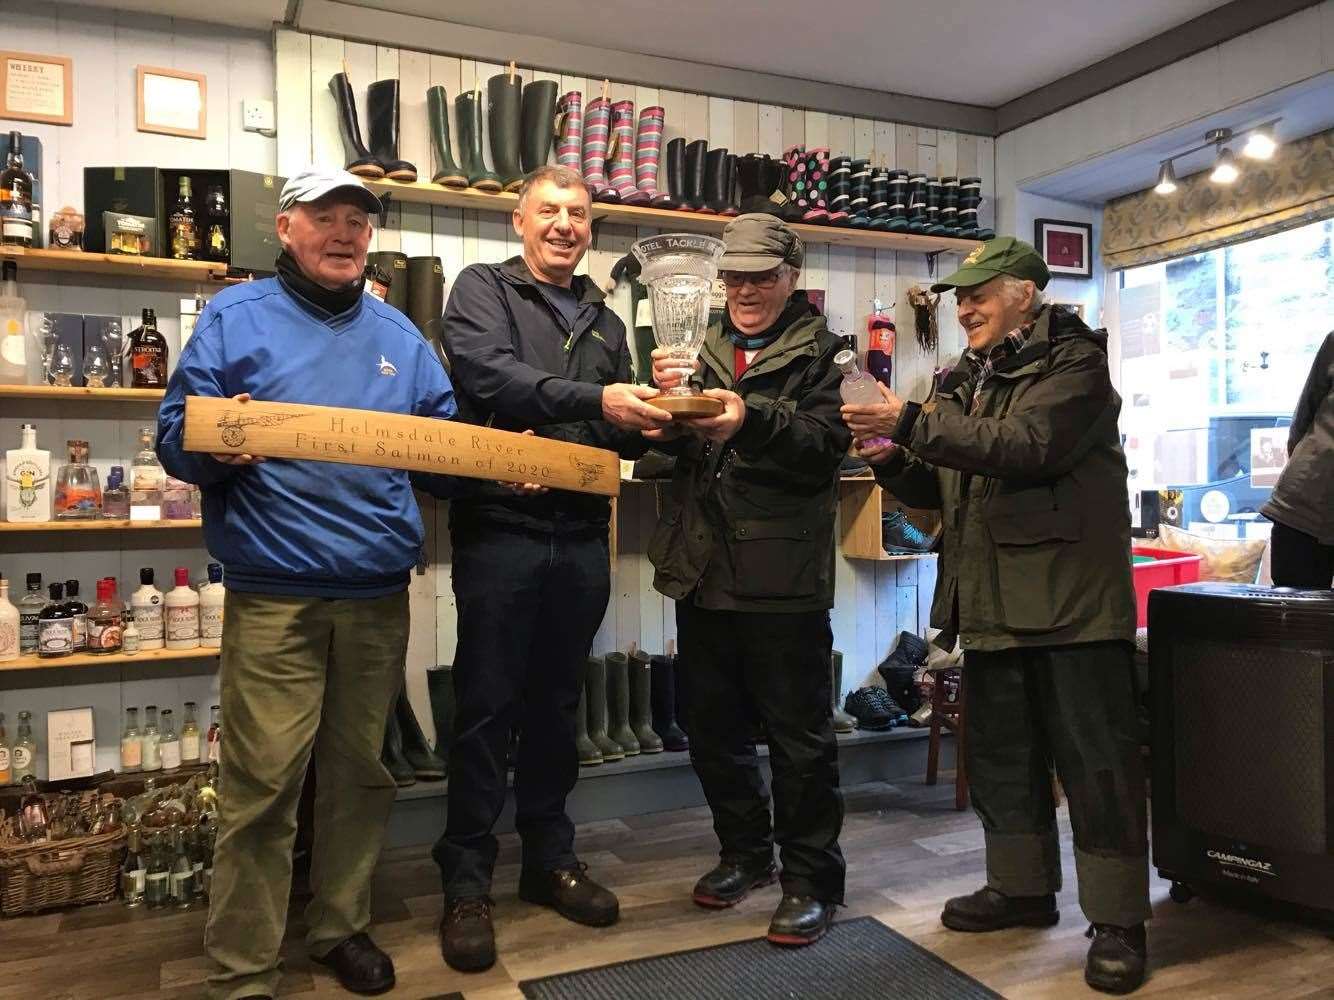 Addie Sutherland is presented with the crystal vase by Andy Sutherland, who caught the first fish in 2019, while Johnny Sutherland (left) holds the whisky stave. Standing right with the bottle of gin is Sonny Jappy, whose grandson Findlay Adams made the first cast this year.